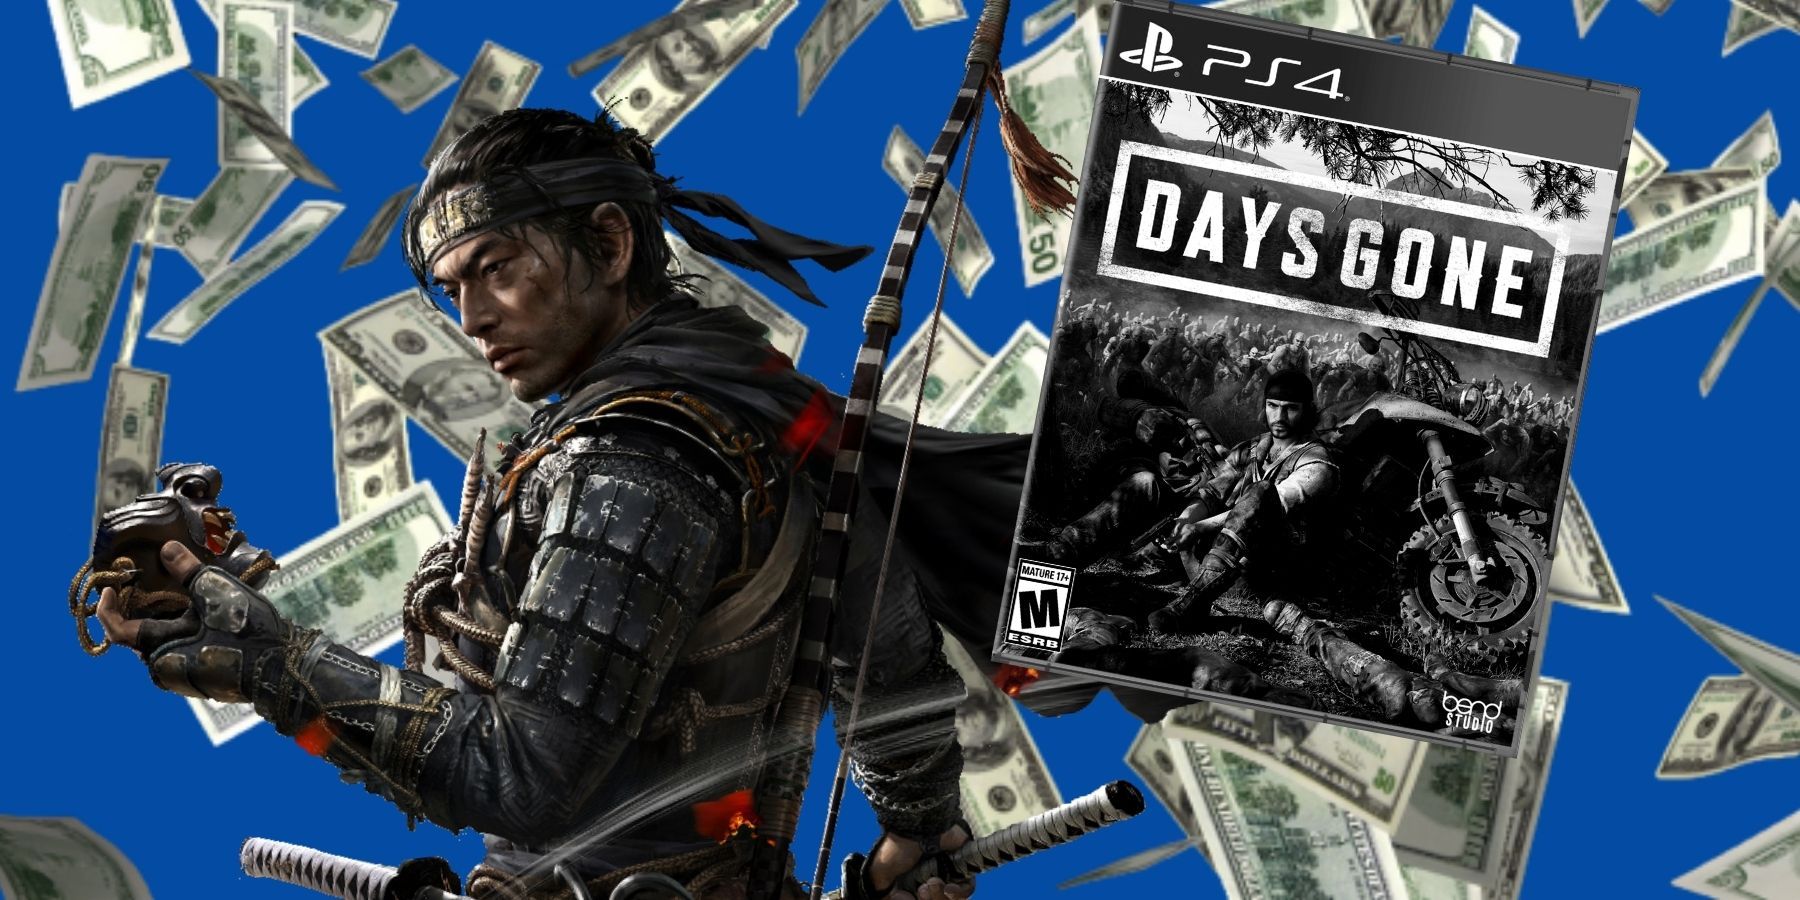 ghost of tsushima days gone sales controversy explained